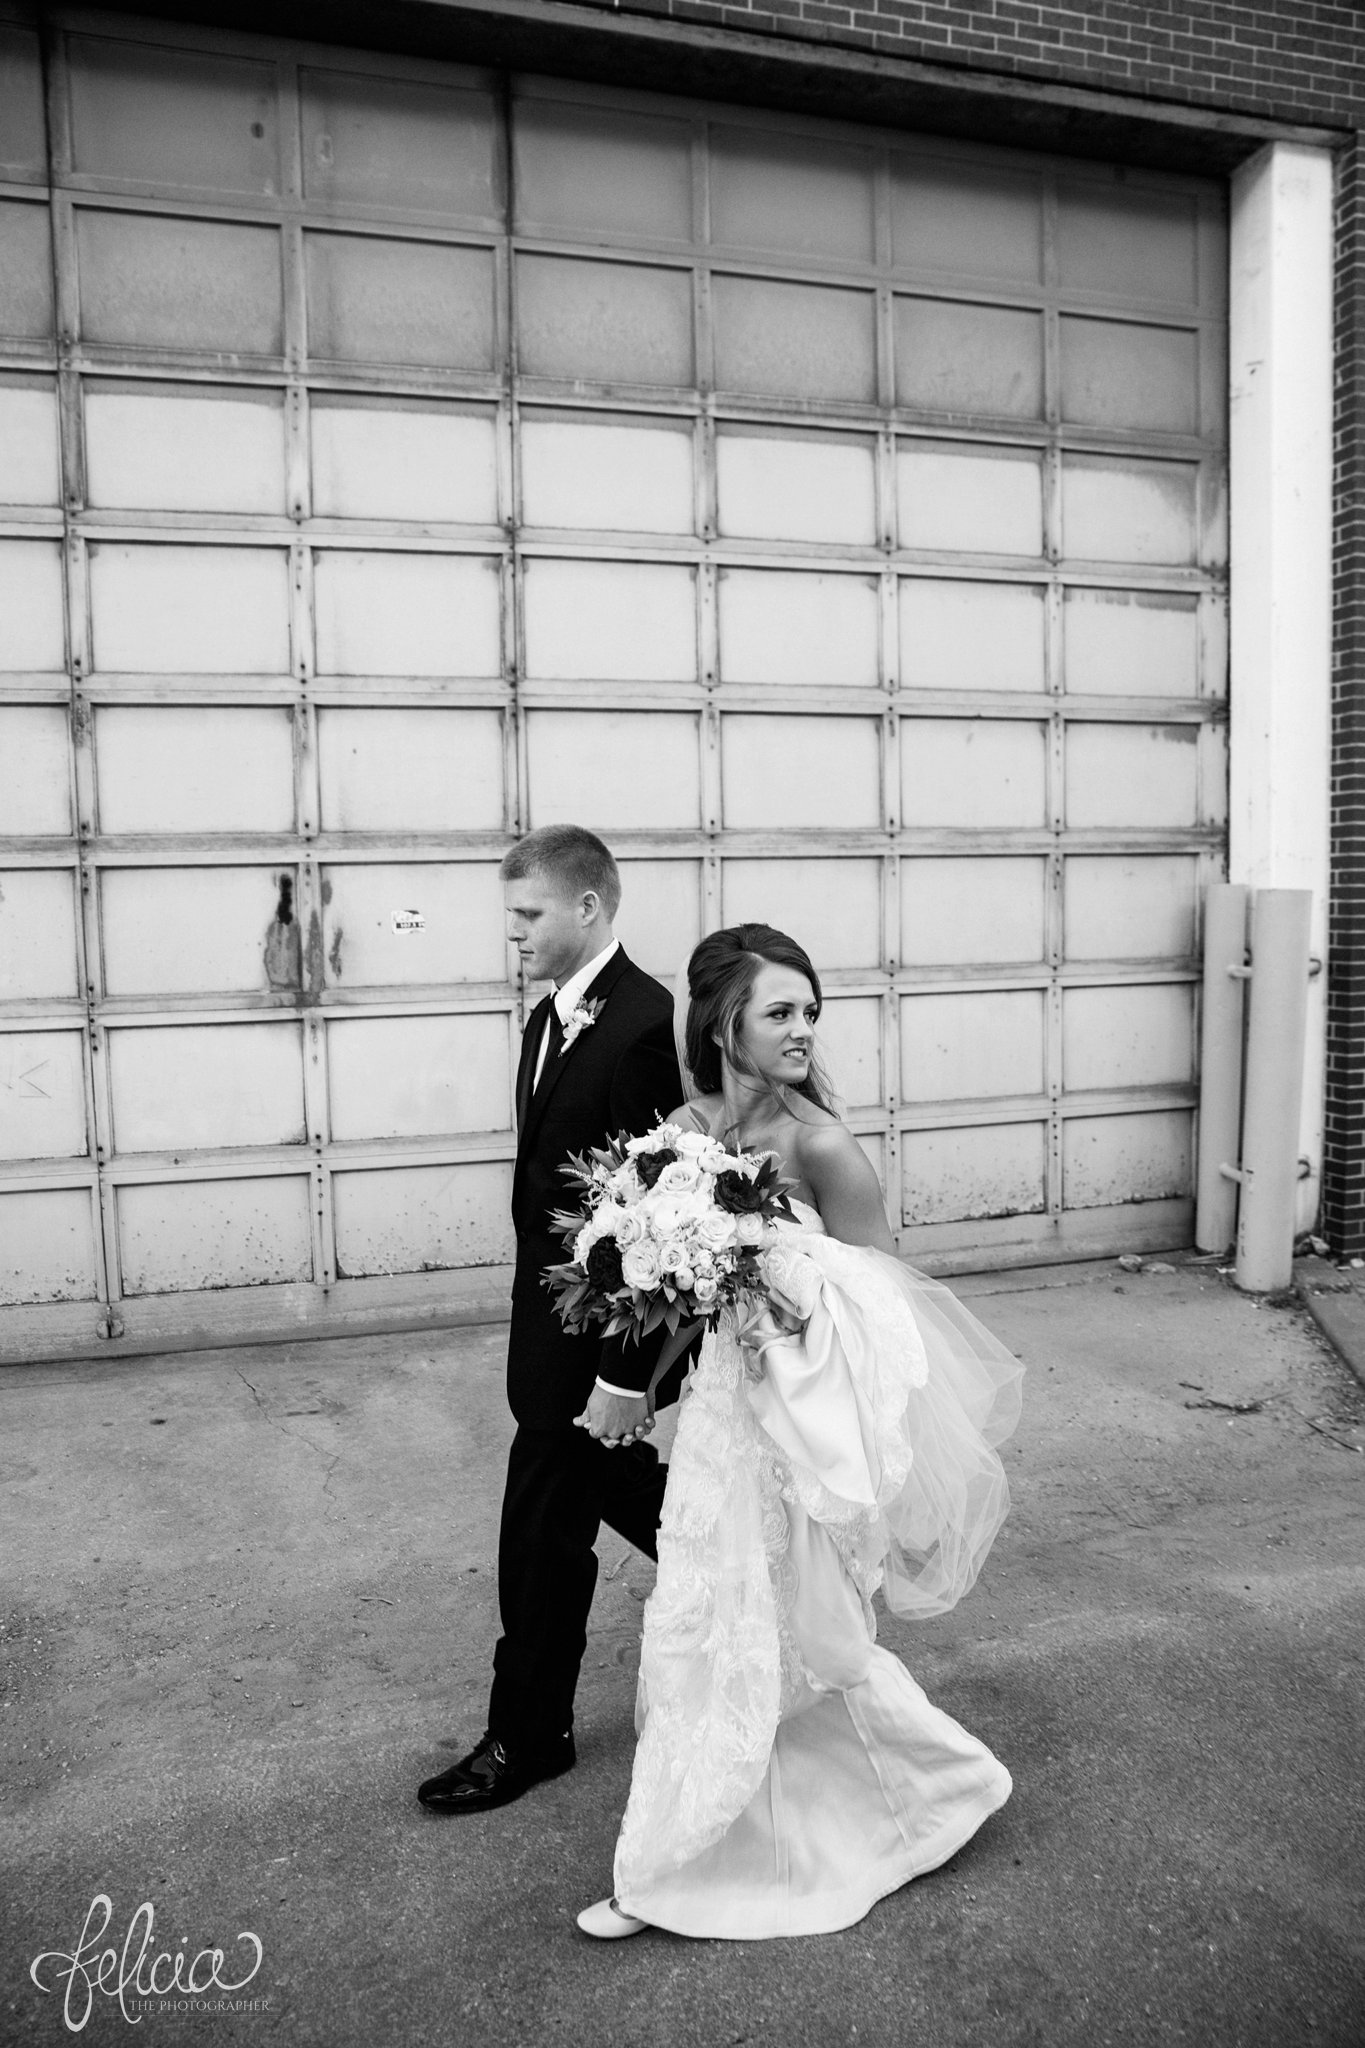 black and white | wedding | wedding photos | industrial | Rumely Event Space | wedding photography | images by feliciathephotographer.com | West Bottoms | industrial background | garage | candid | walking | hand in hand 